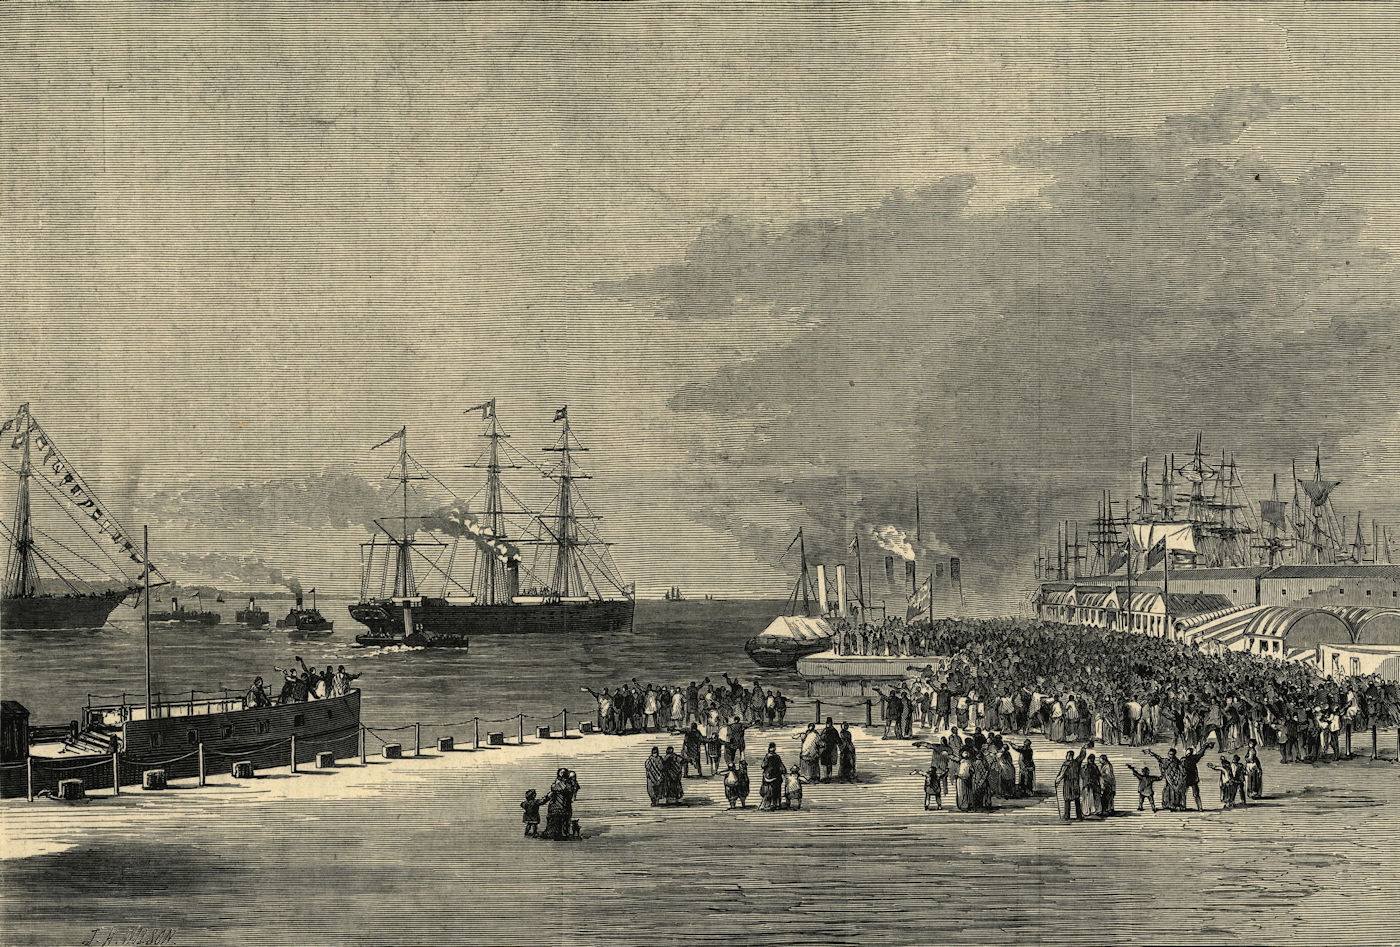 The Marquis of Lorne & Princess Louise departing from Liverpool for Canada 1878